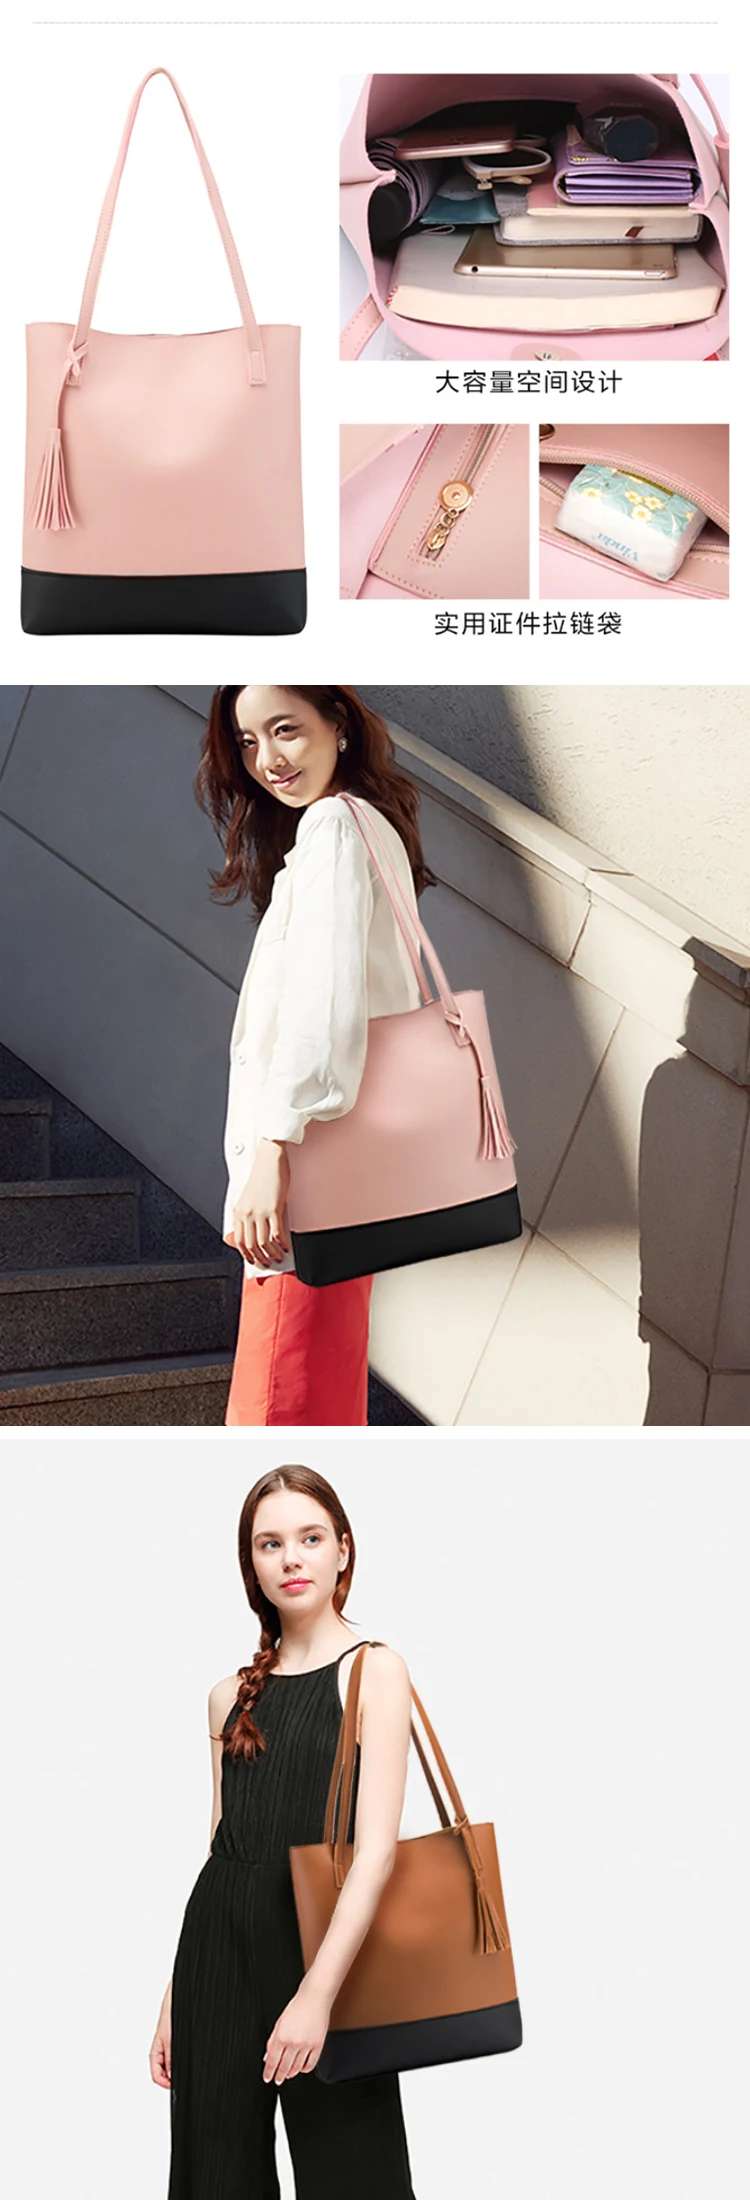 Osgoodway2 Latest Fashion Official Leather Tote Handbags Bags Women PU Shoulder Bag